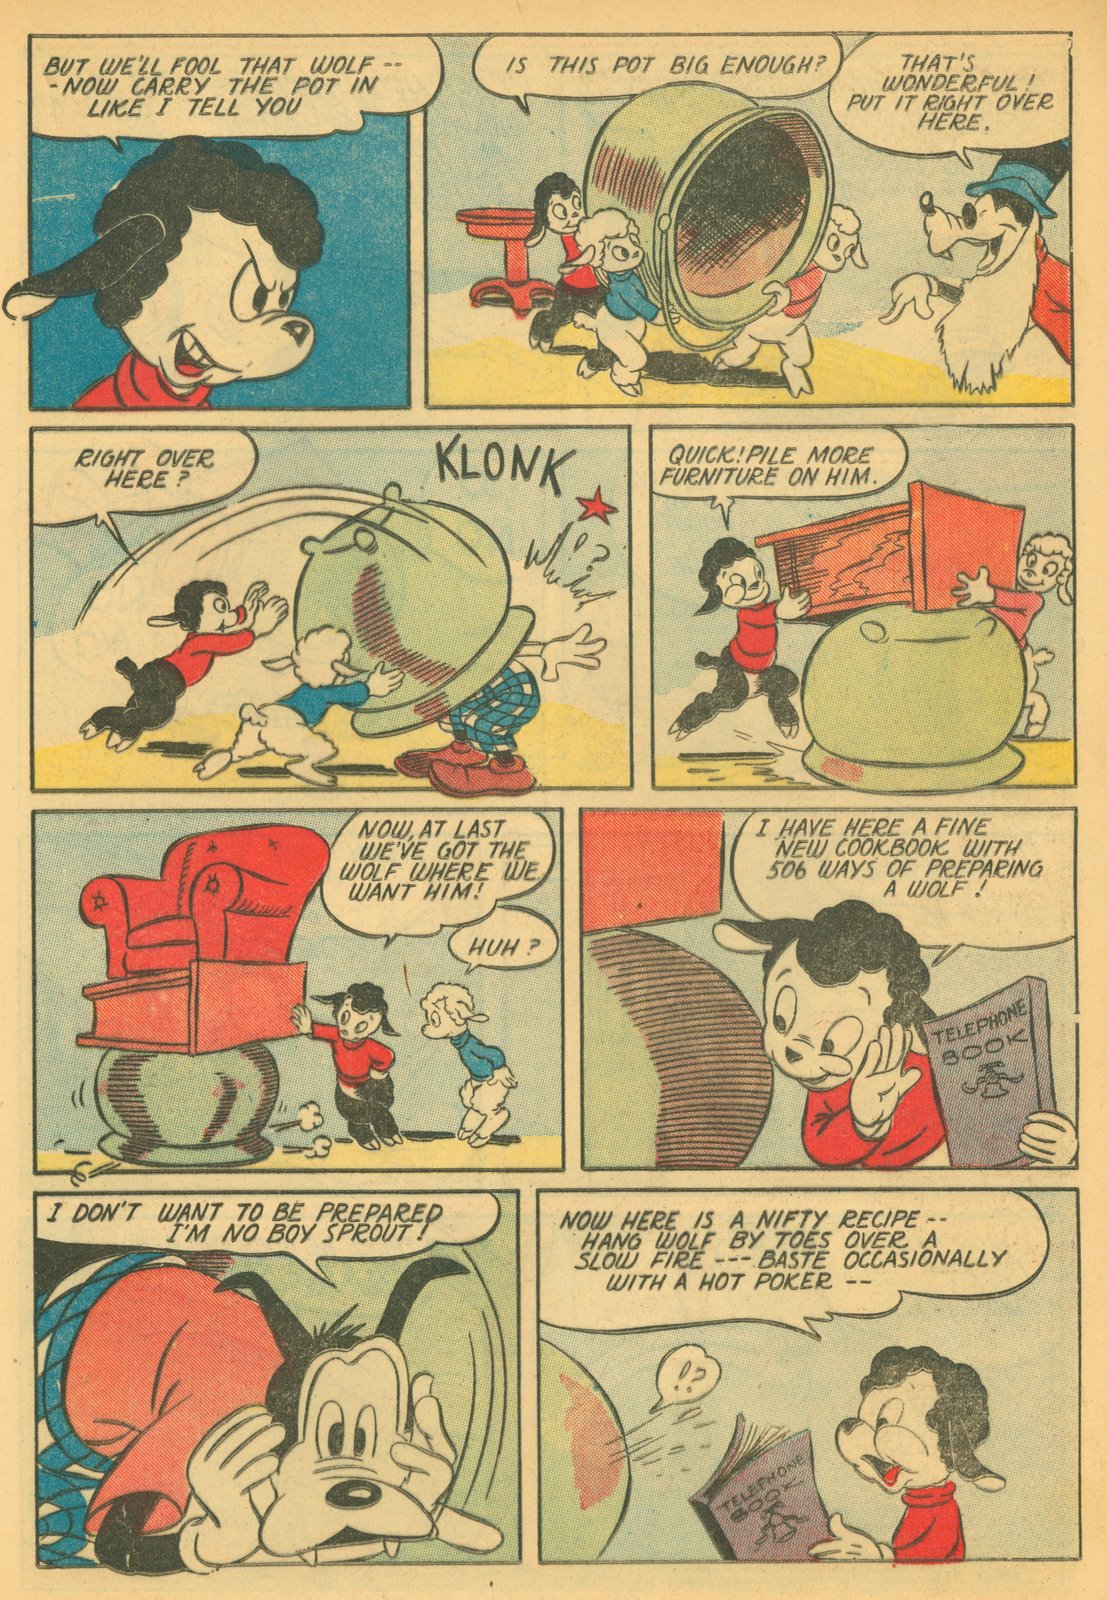 Classic Cartoons: Wolfie's antics by the one and only Walt Kelly